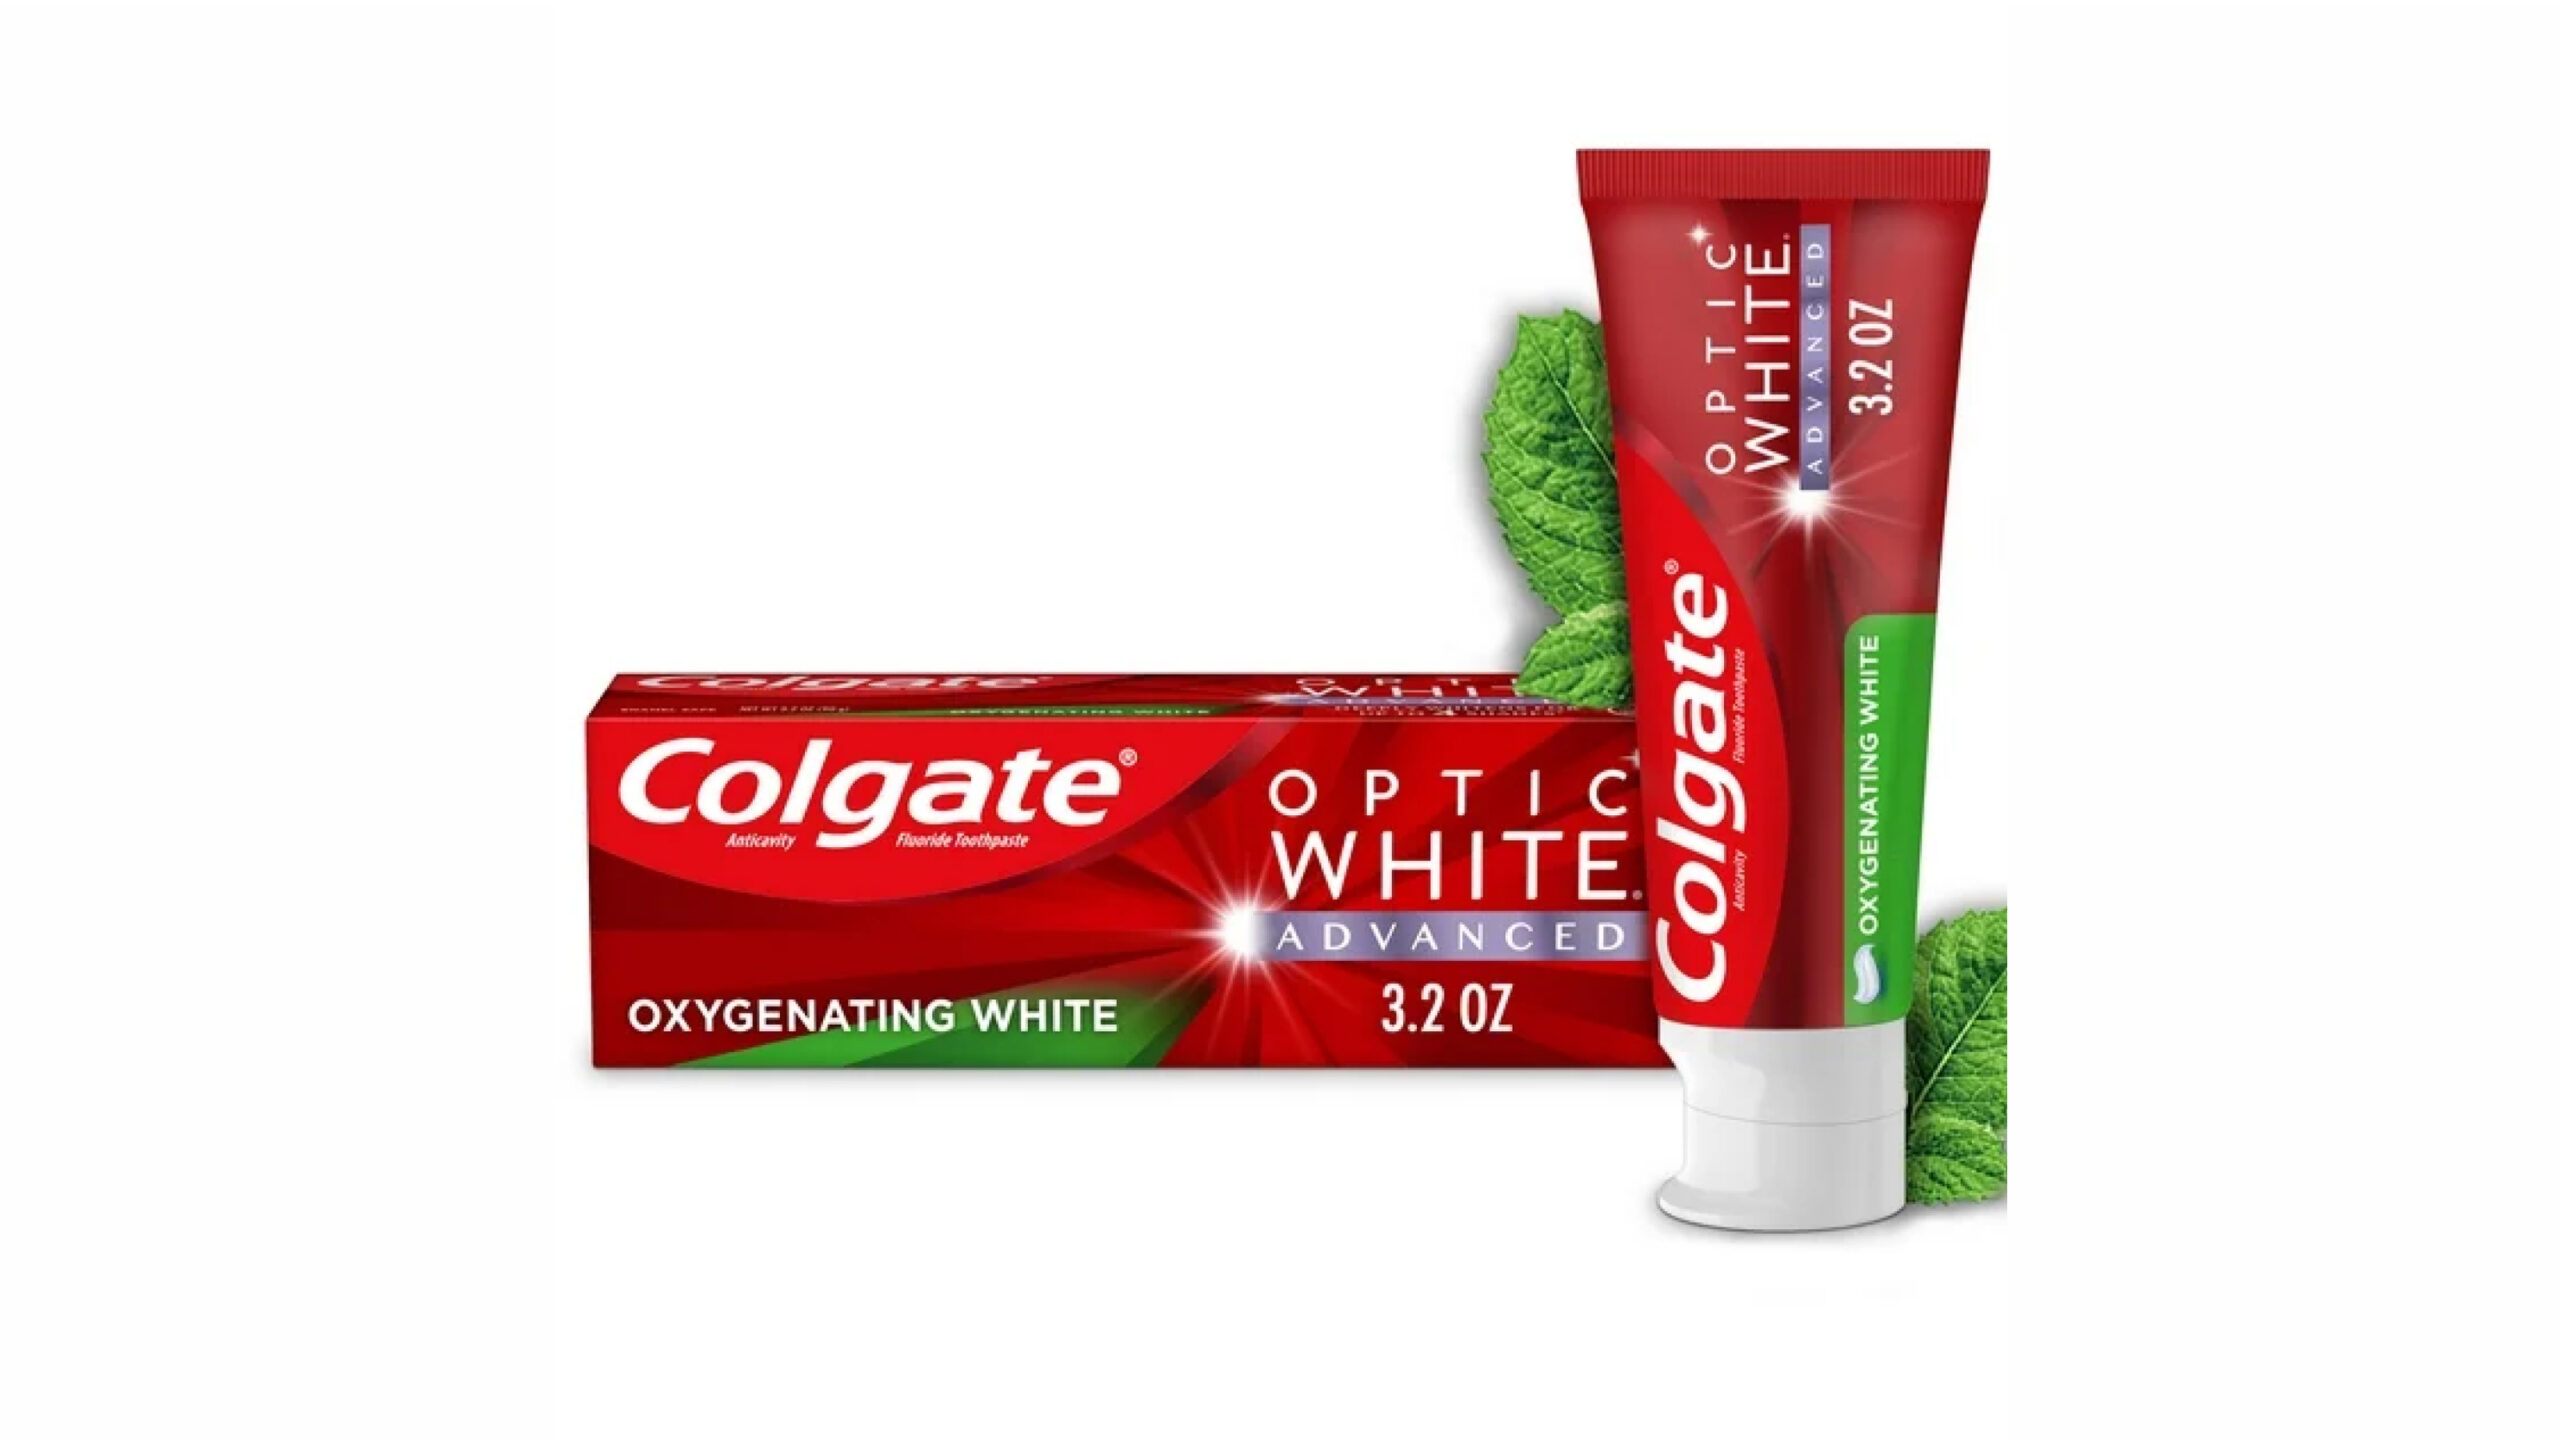 pack of 3.2 oz colgate optic white advanced hydrogen peroxide toothpaste sparkling white